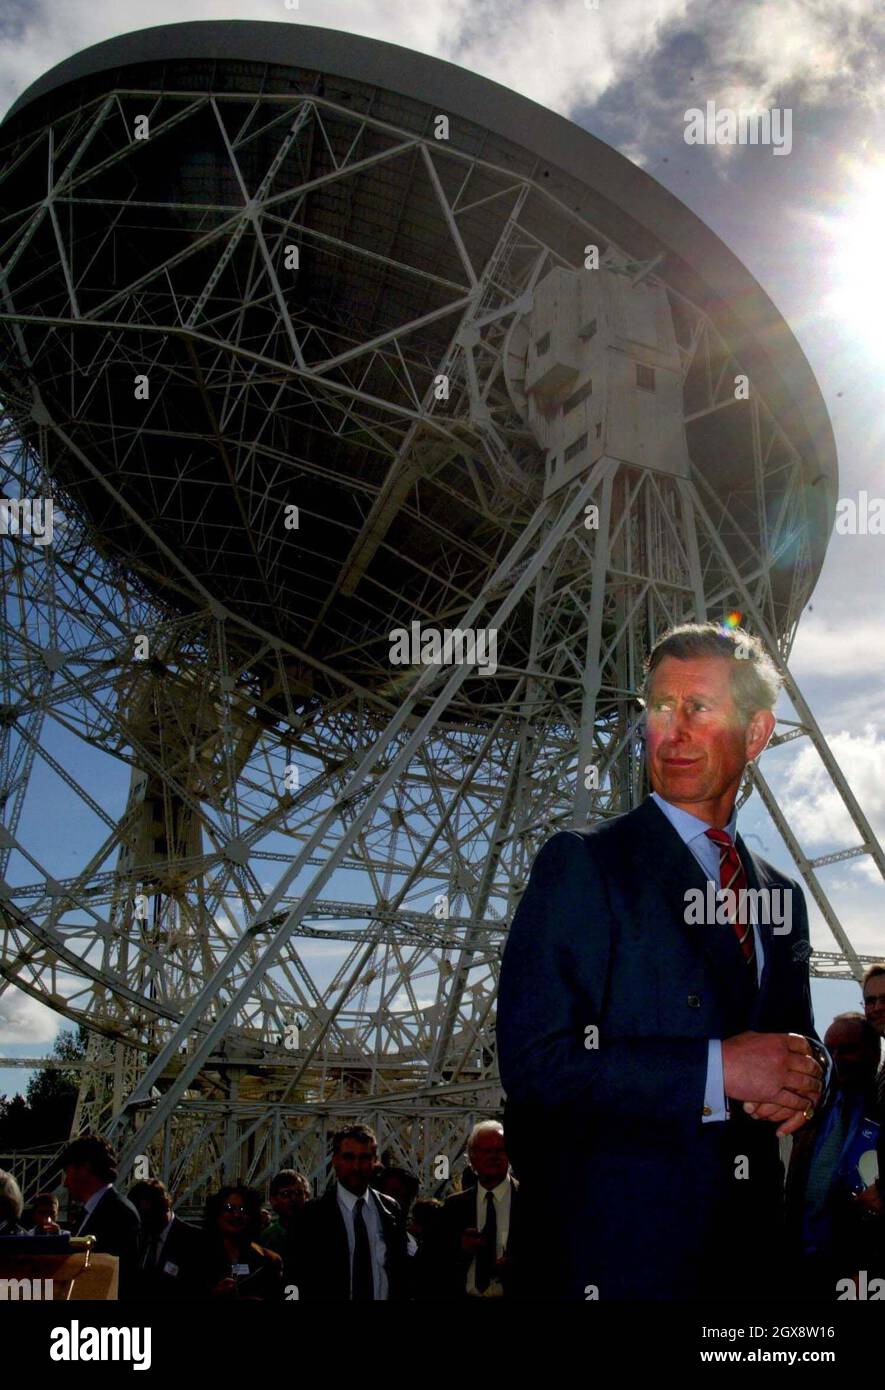 The Prince of Wales walks past the Lovell Radio telescope during a visit to the Jodrell Bank Observatory in Cheshire. Half length, royals, suit  Â©Anwar Hussein/allaction.co.uk  Stock Photo